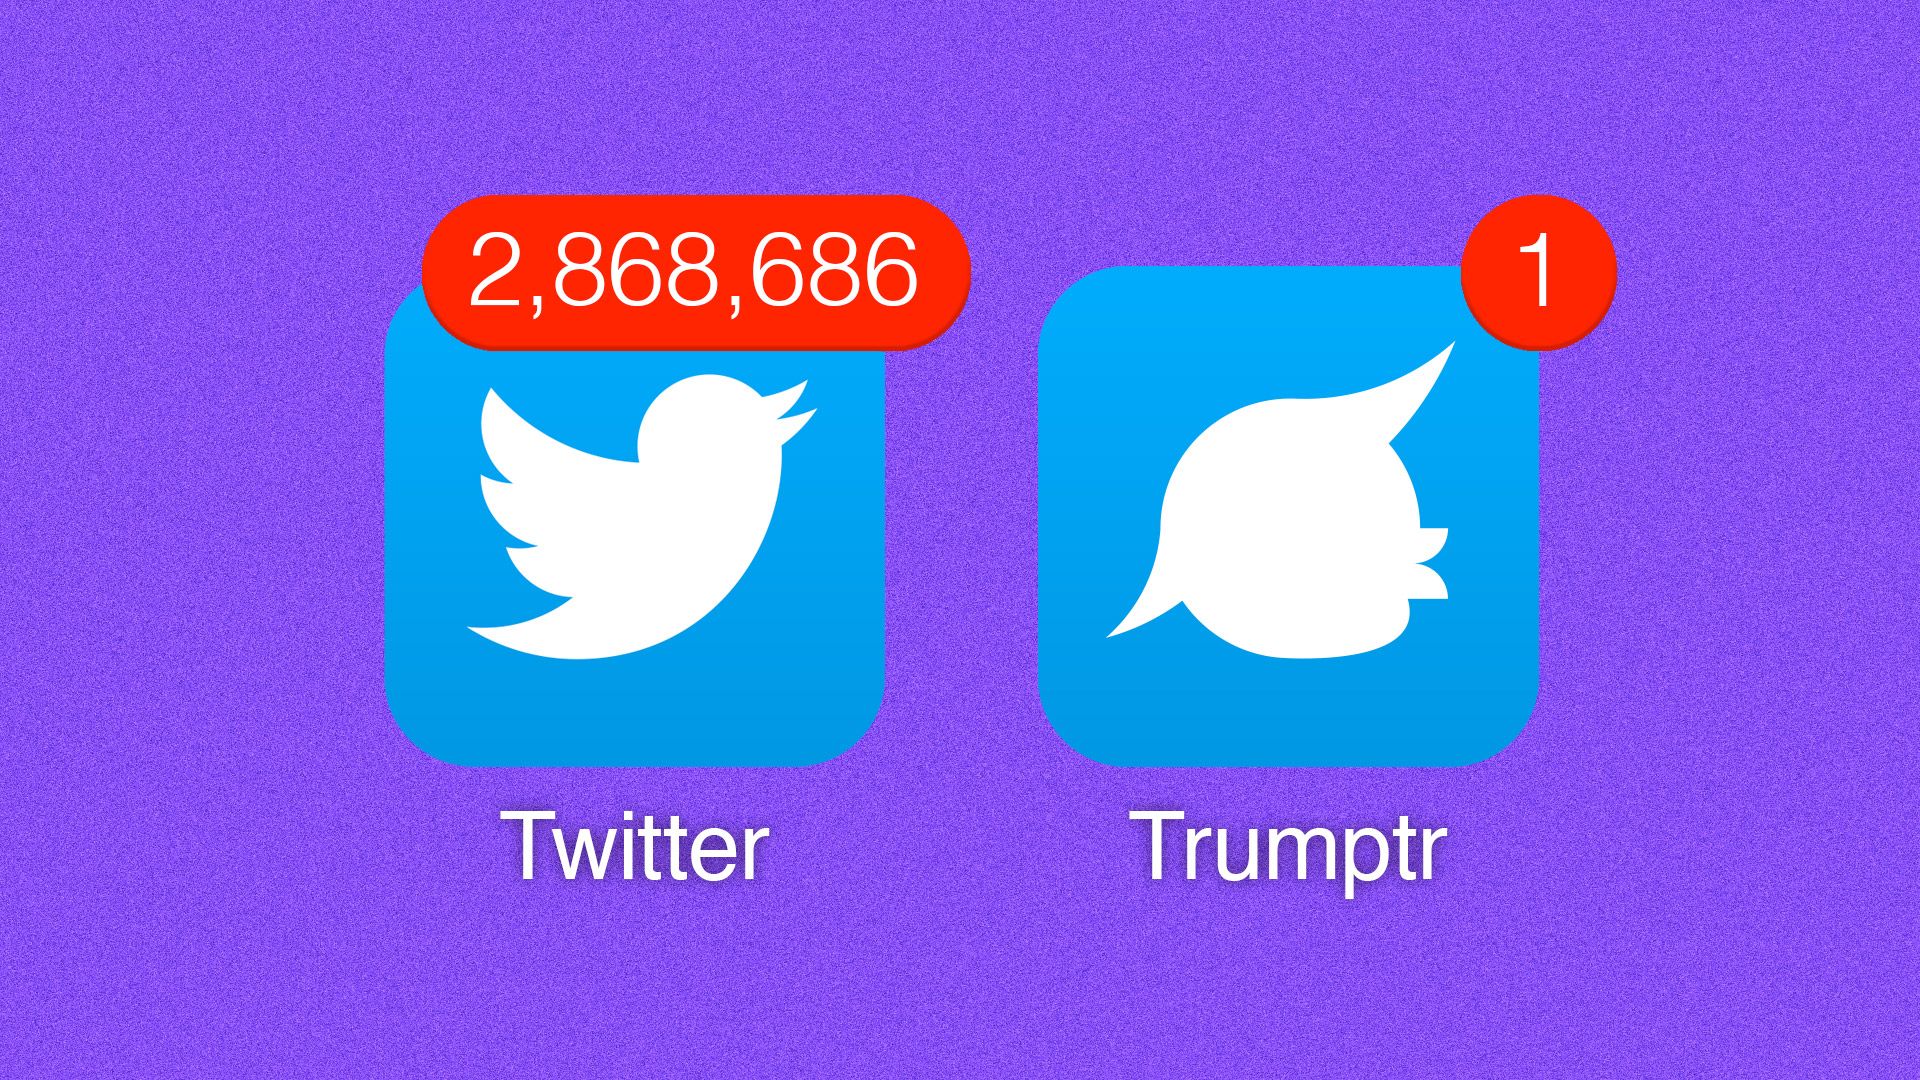 Here's an illustration of what a Trump social network would look like, next to Twitter's button